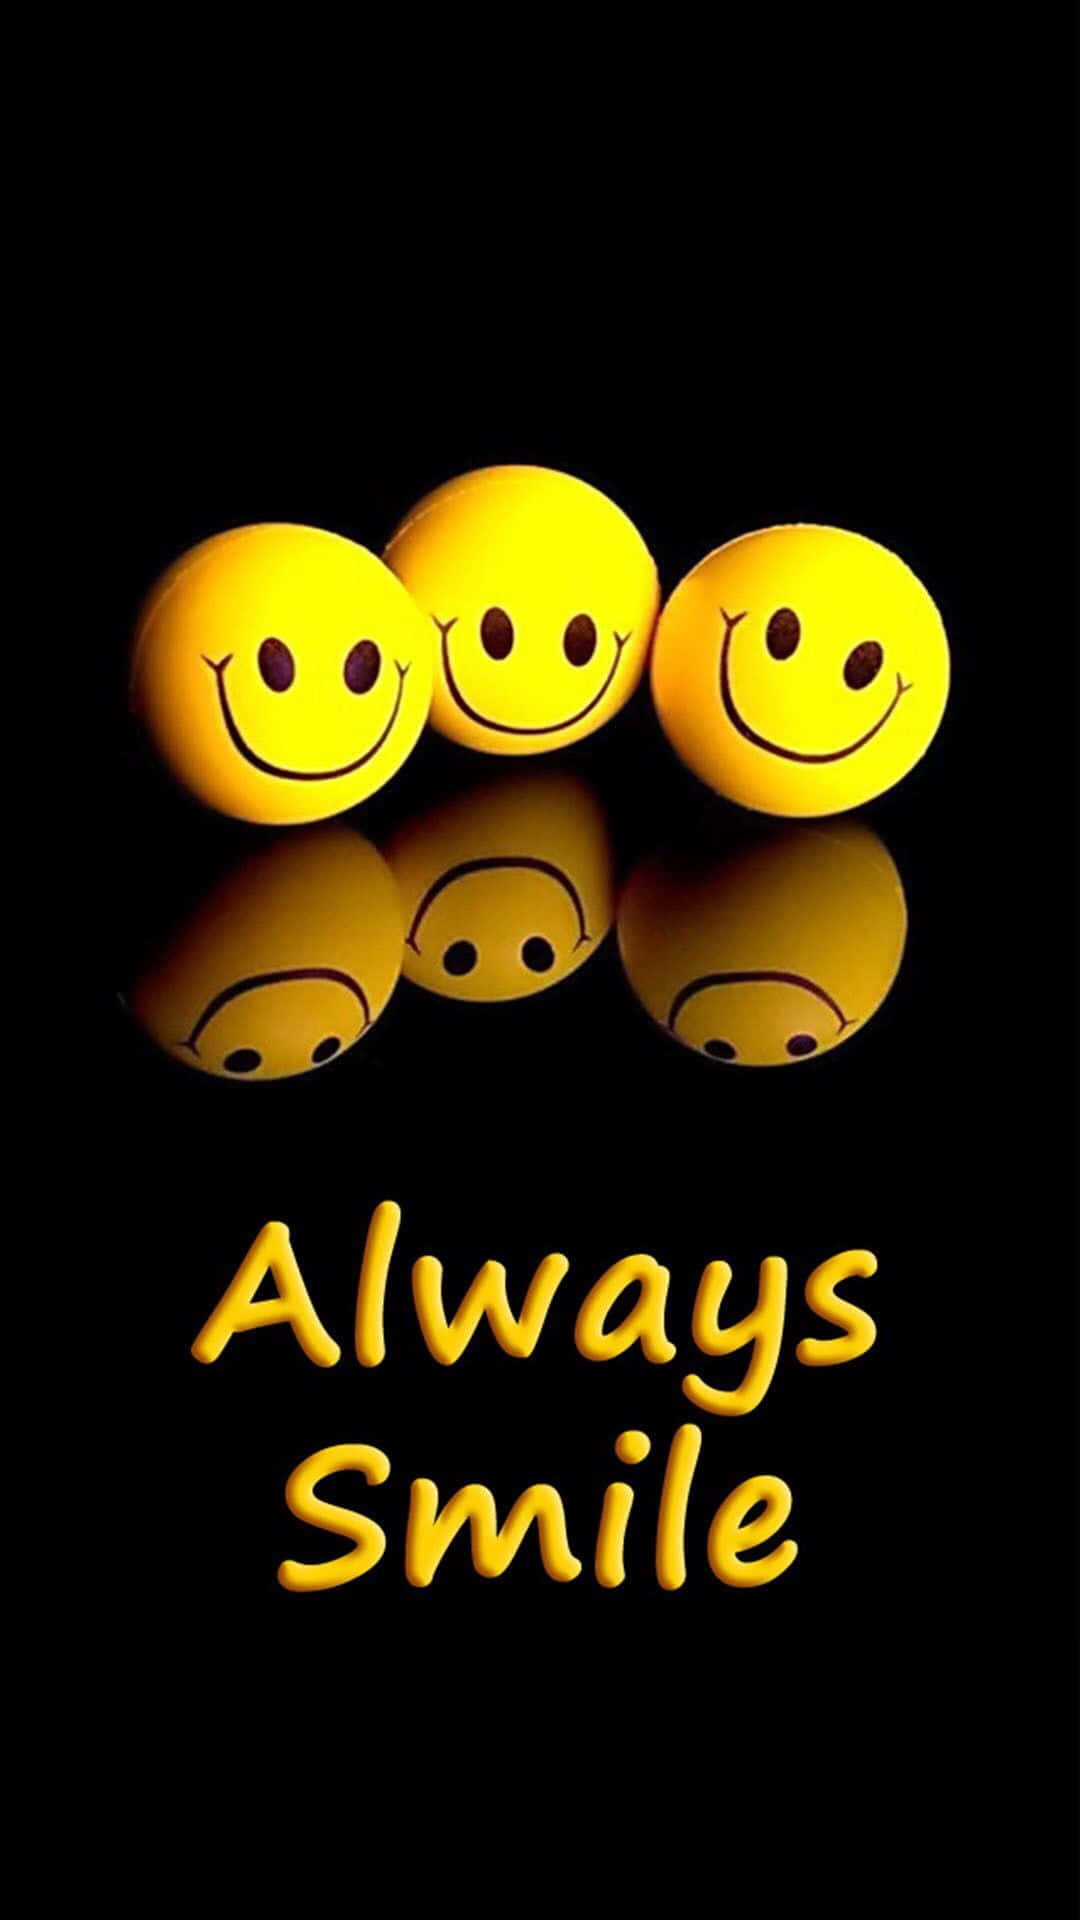 Yellow Circle With Happy Smile Face Wallpaper